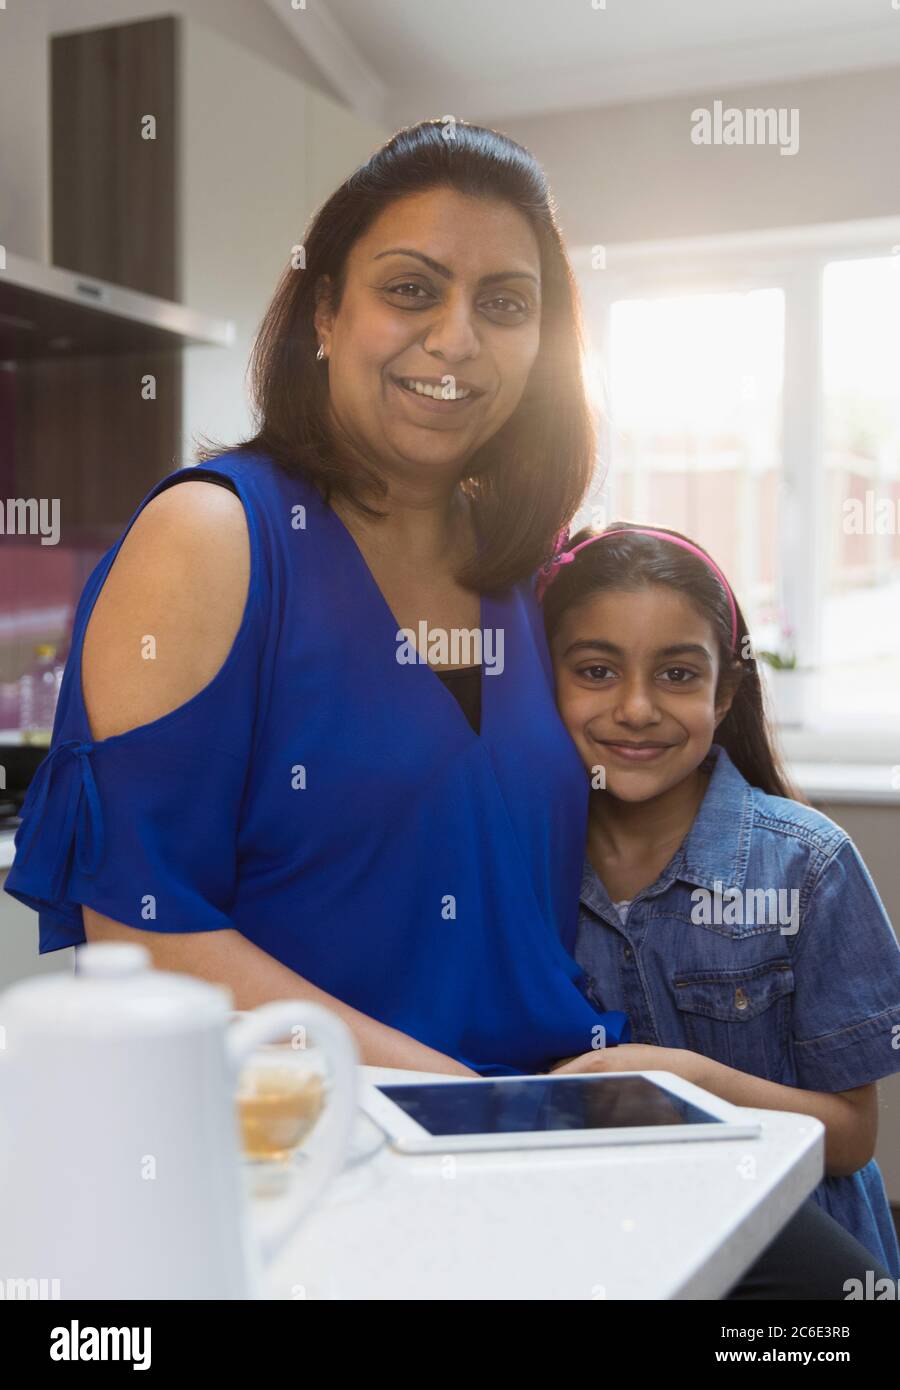 Portrait smiling mother and daughter with digital tablet in kitchen Stock Photo